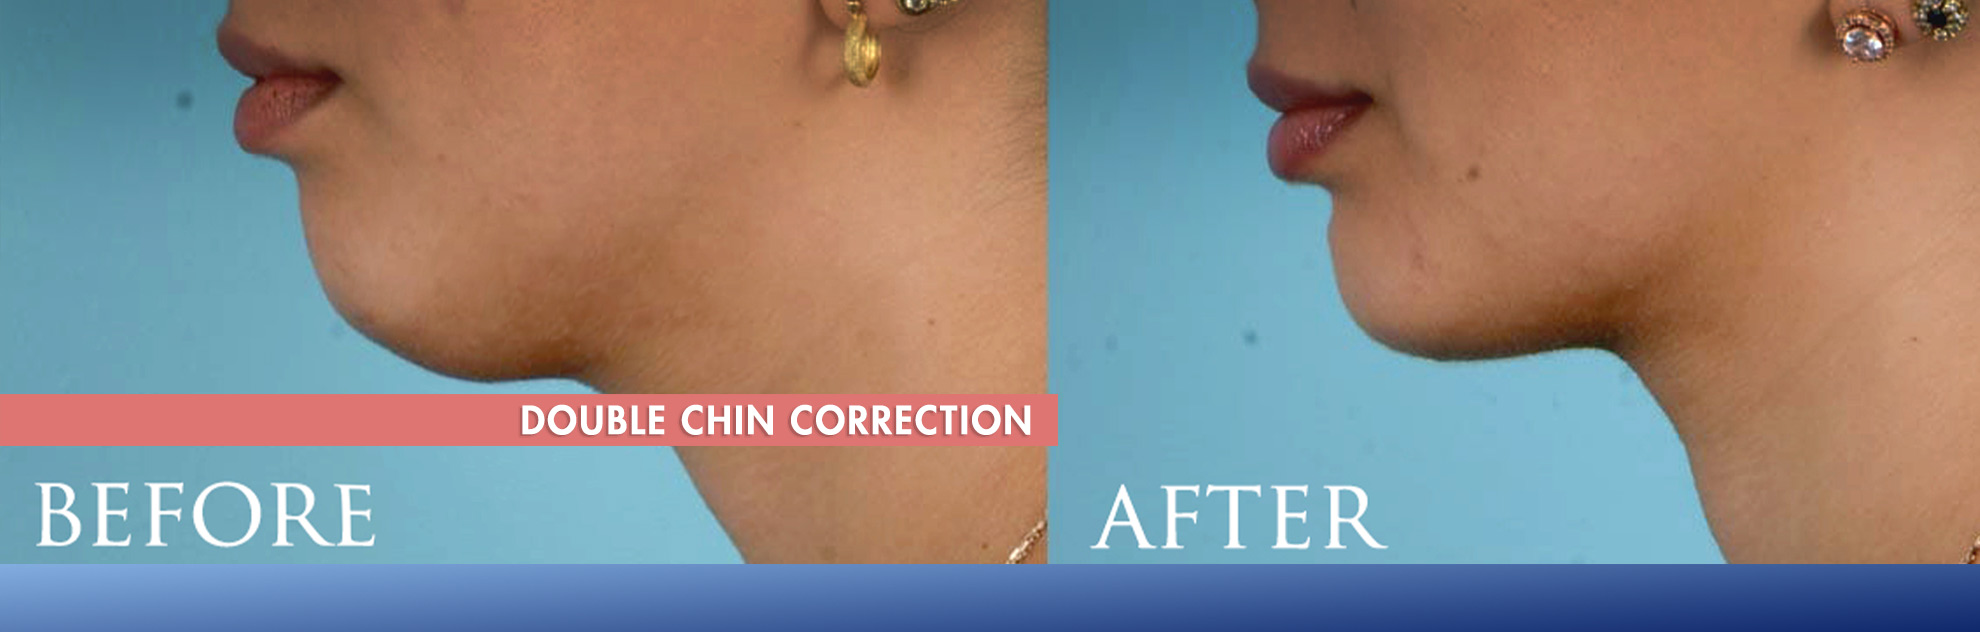 Double chin surgery hyderabad